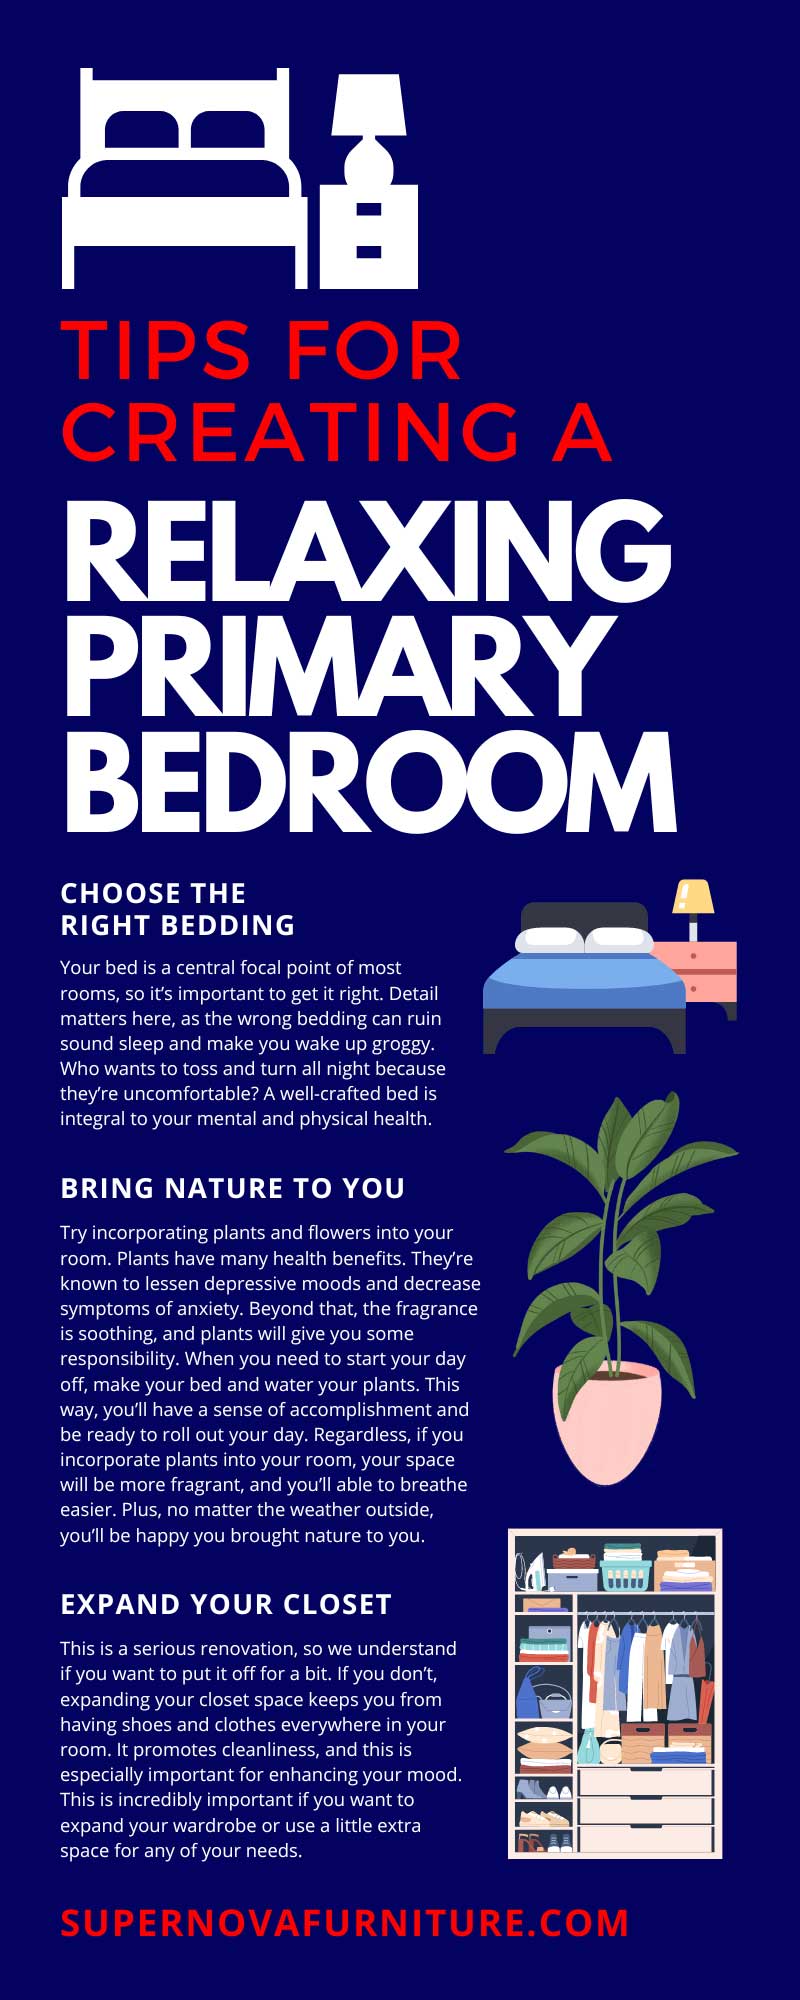 Tips for Creating a Relaxing Primary Bedroom